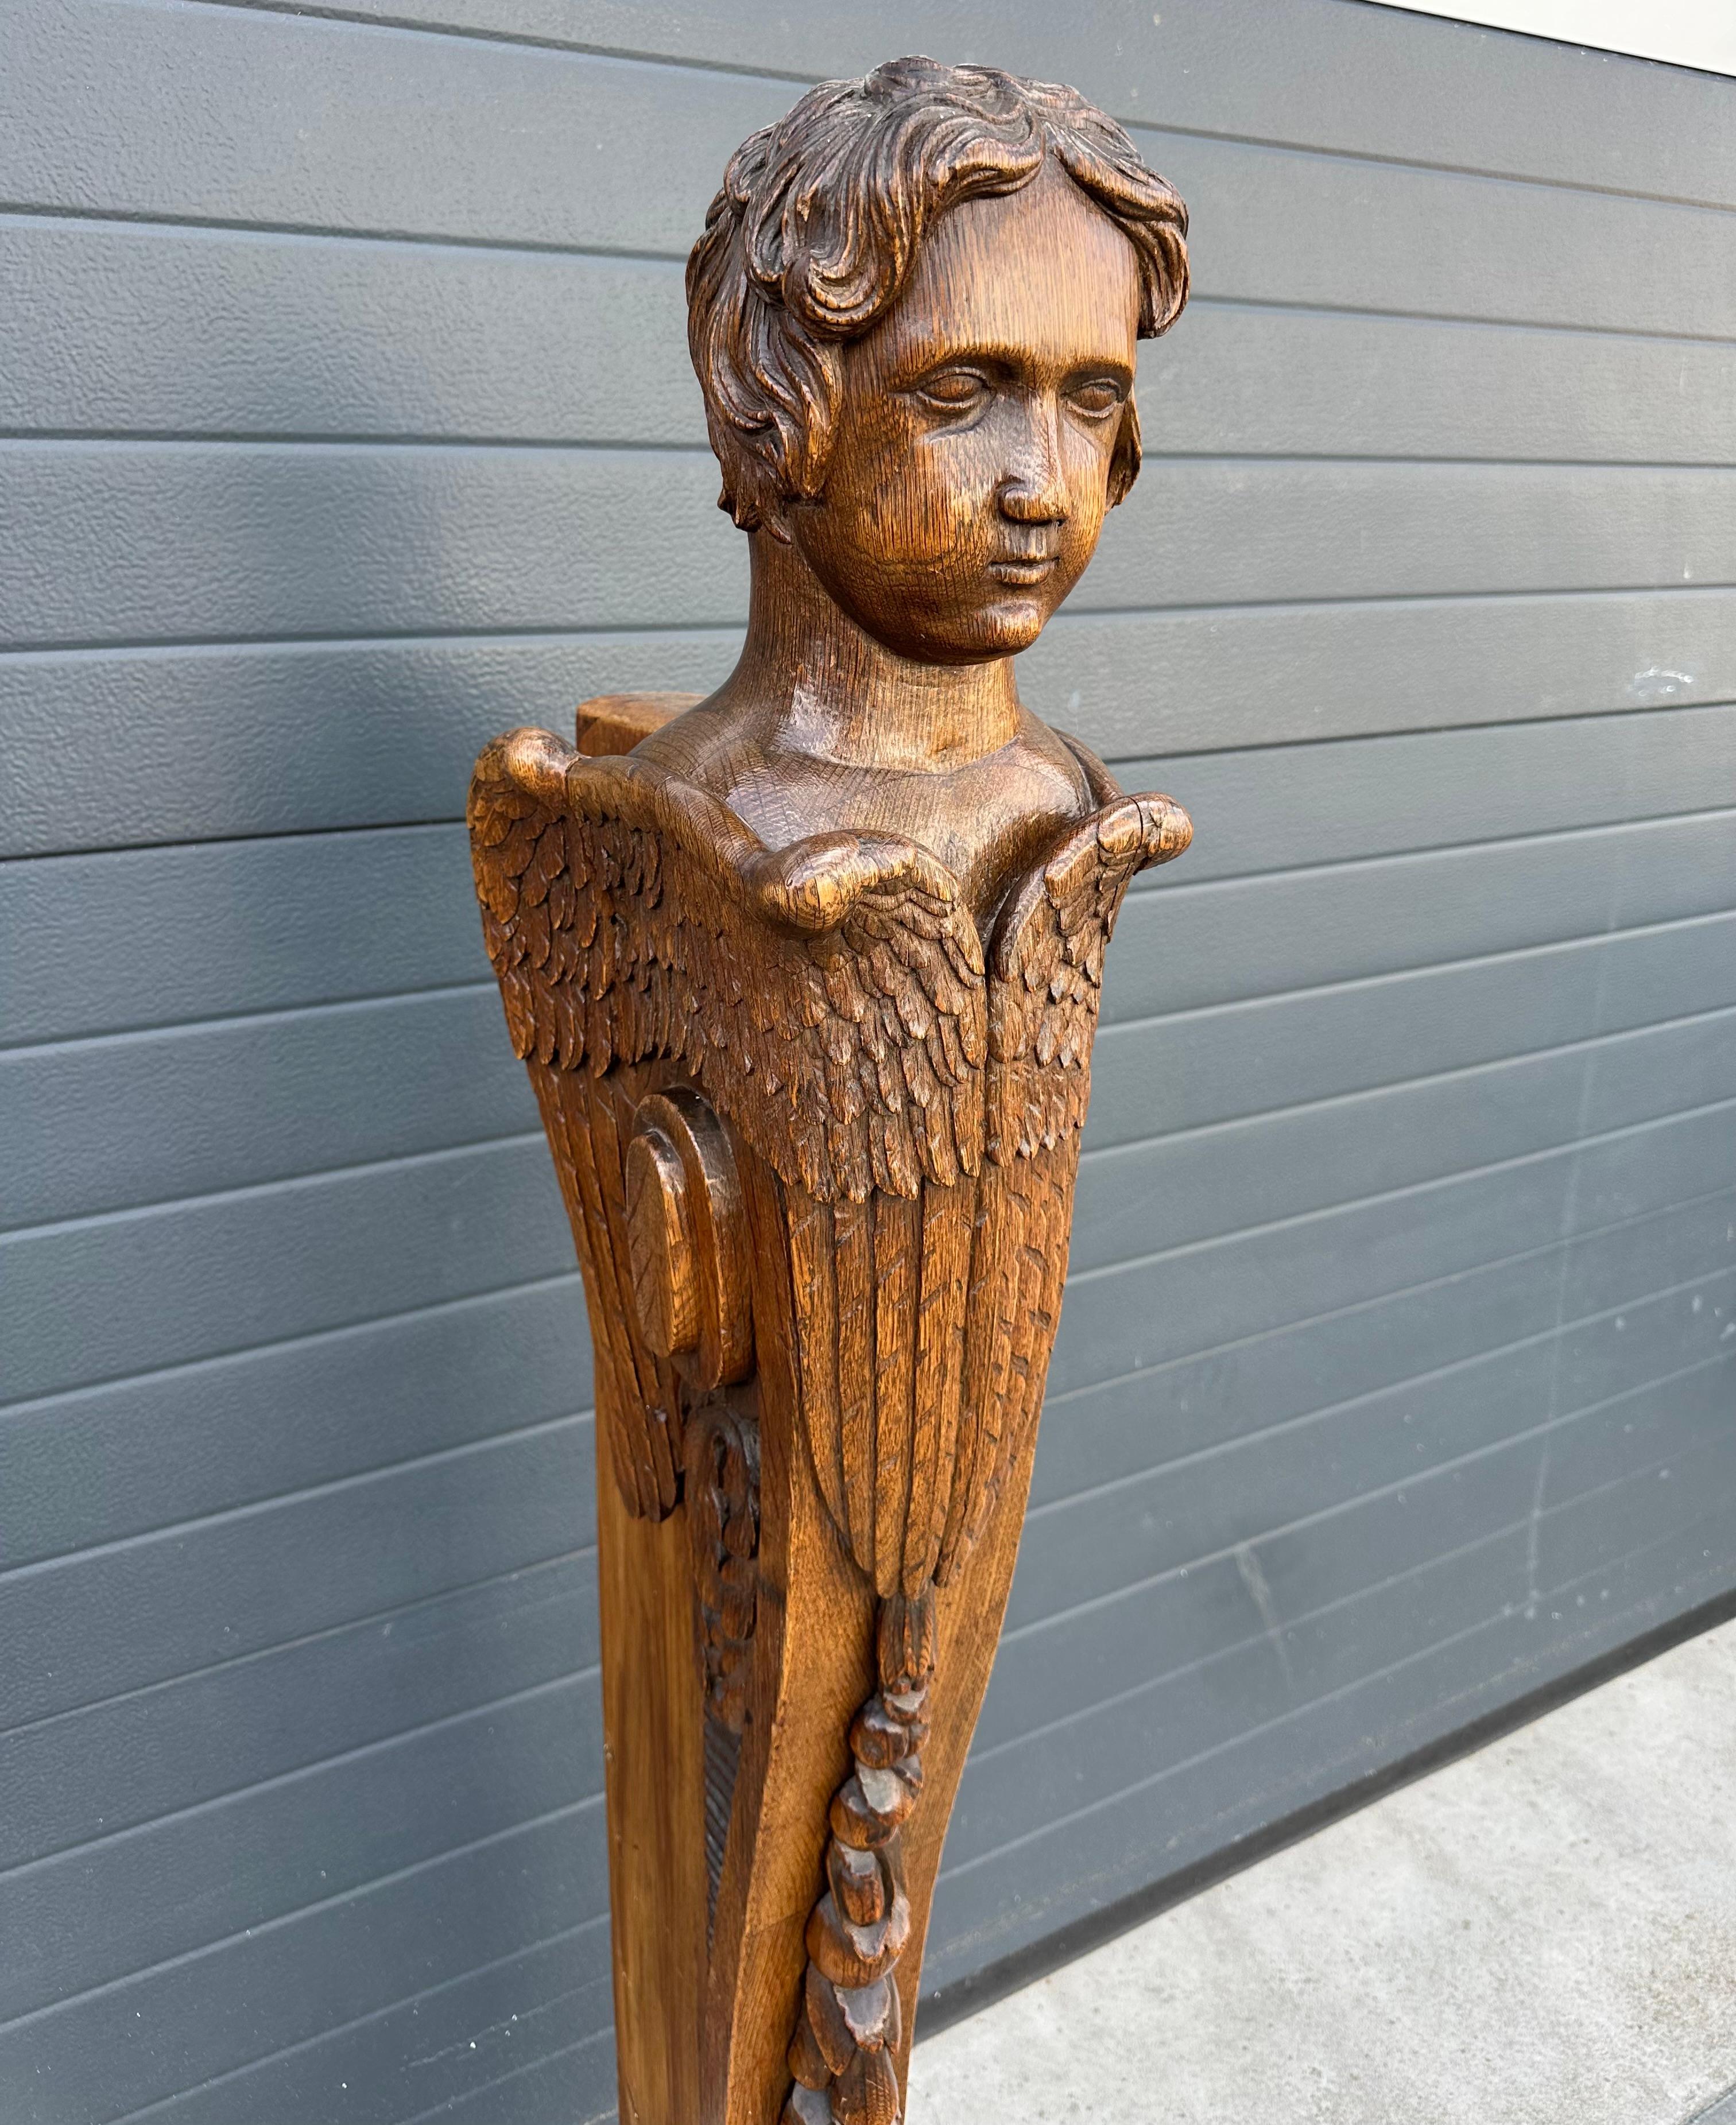 Unique and top quality carved stair newel post from the 1800s.

If you are looking to upgrade the style and quality of your home interior then this fabulously handcarved, antique oak staircase newel post could be yours to own and enjoy soon. Because